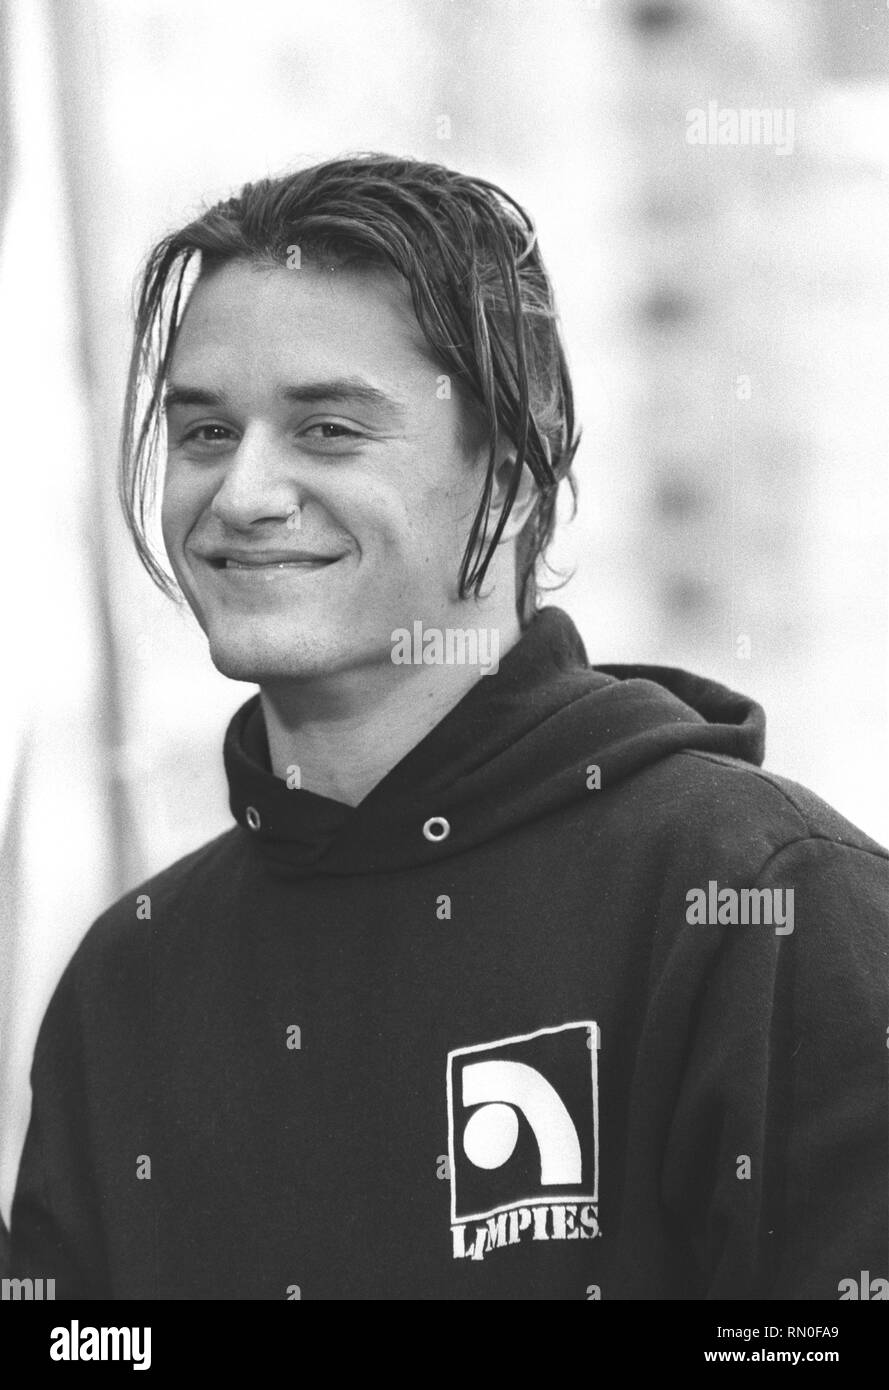 Mike patton Black and White Stock Photos & Images - Alamy